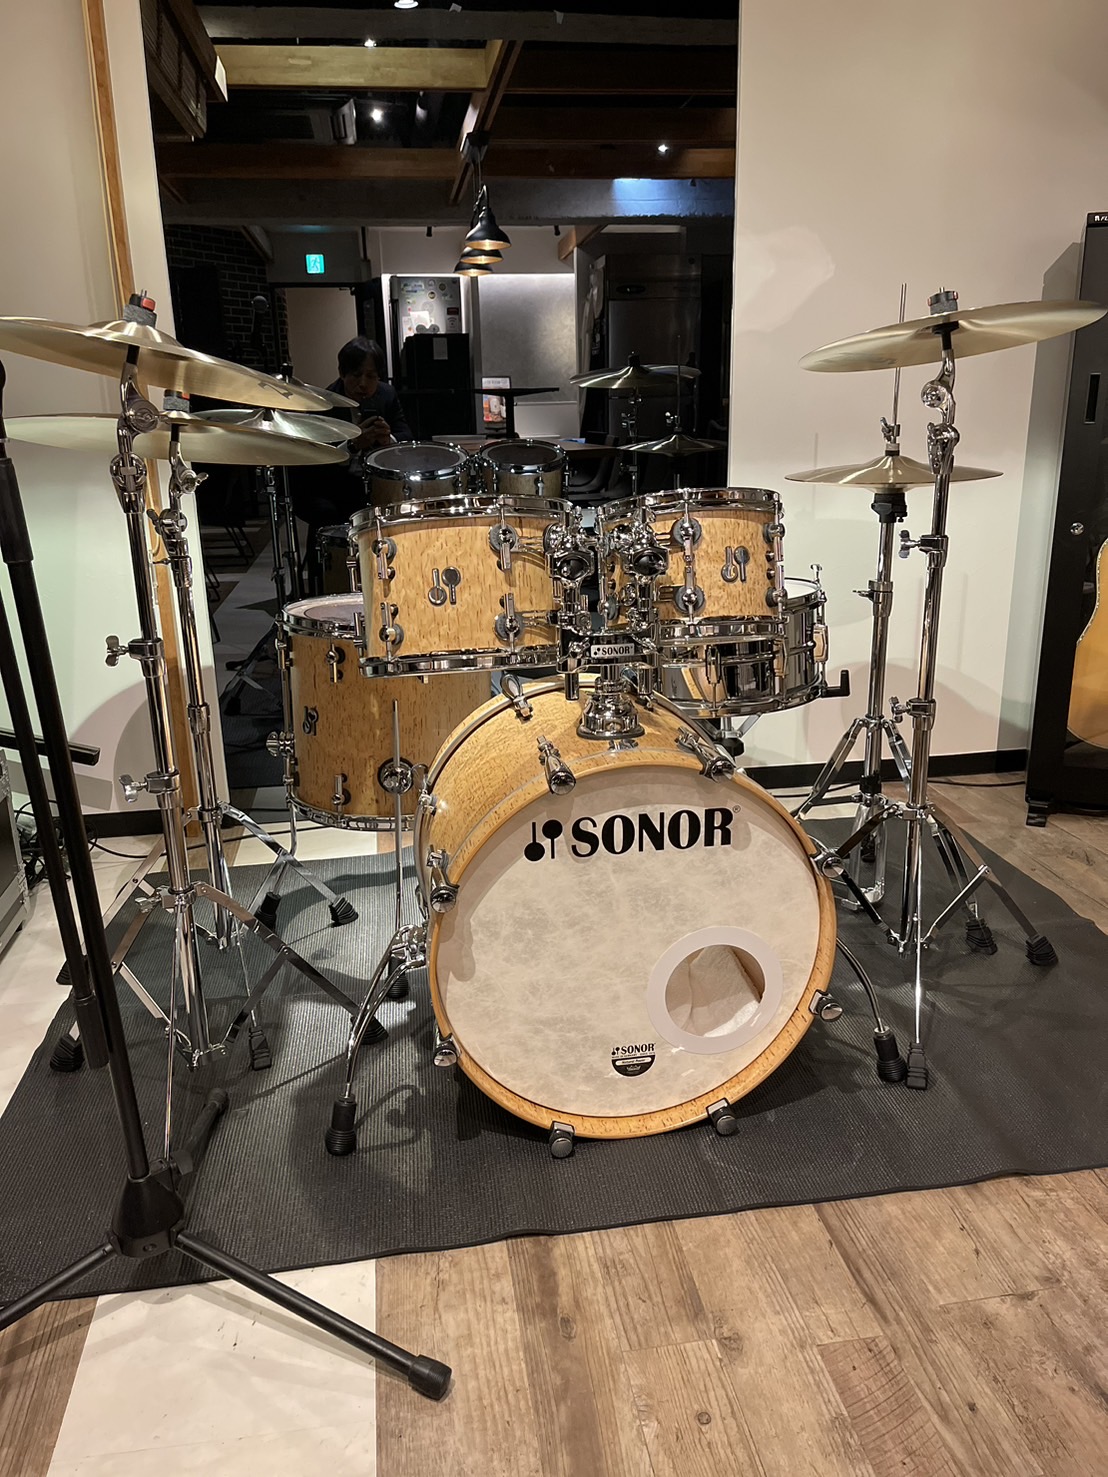 SONOR Model SQ2　Shell/ Beech, Shell Type/ Vintage